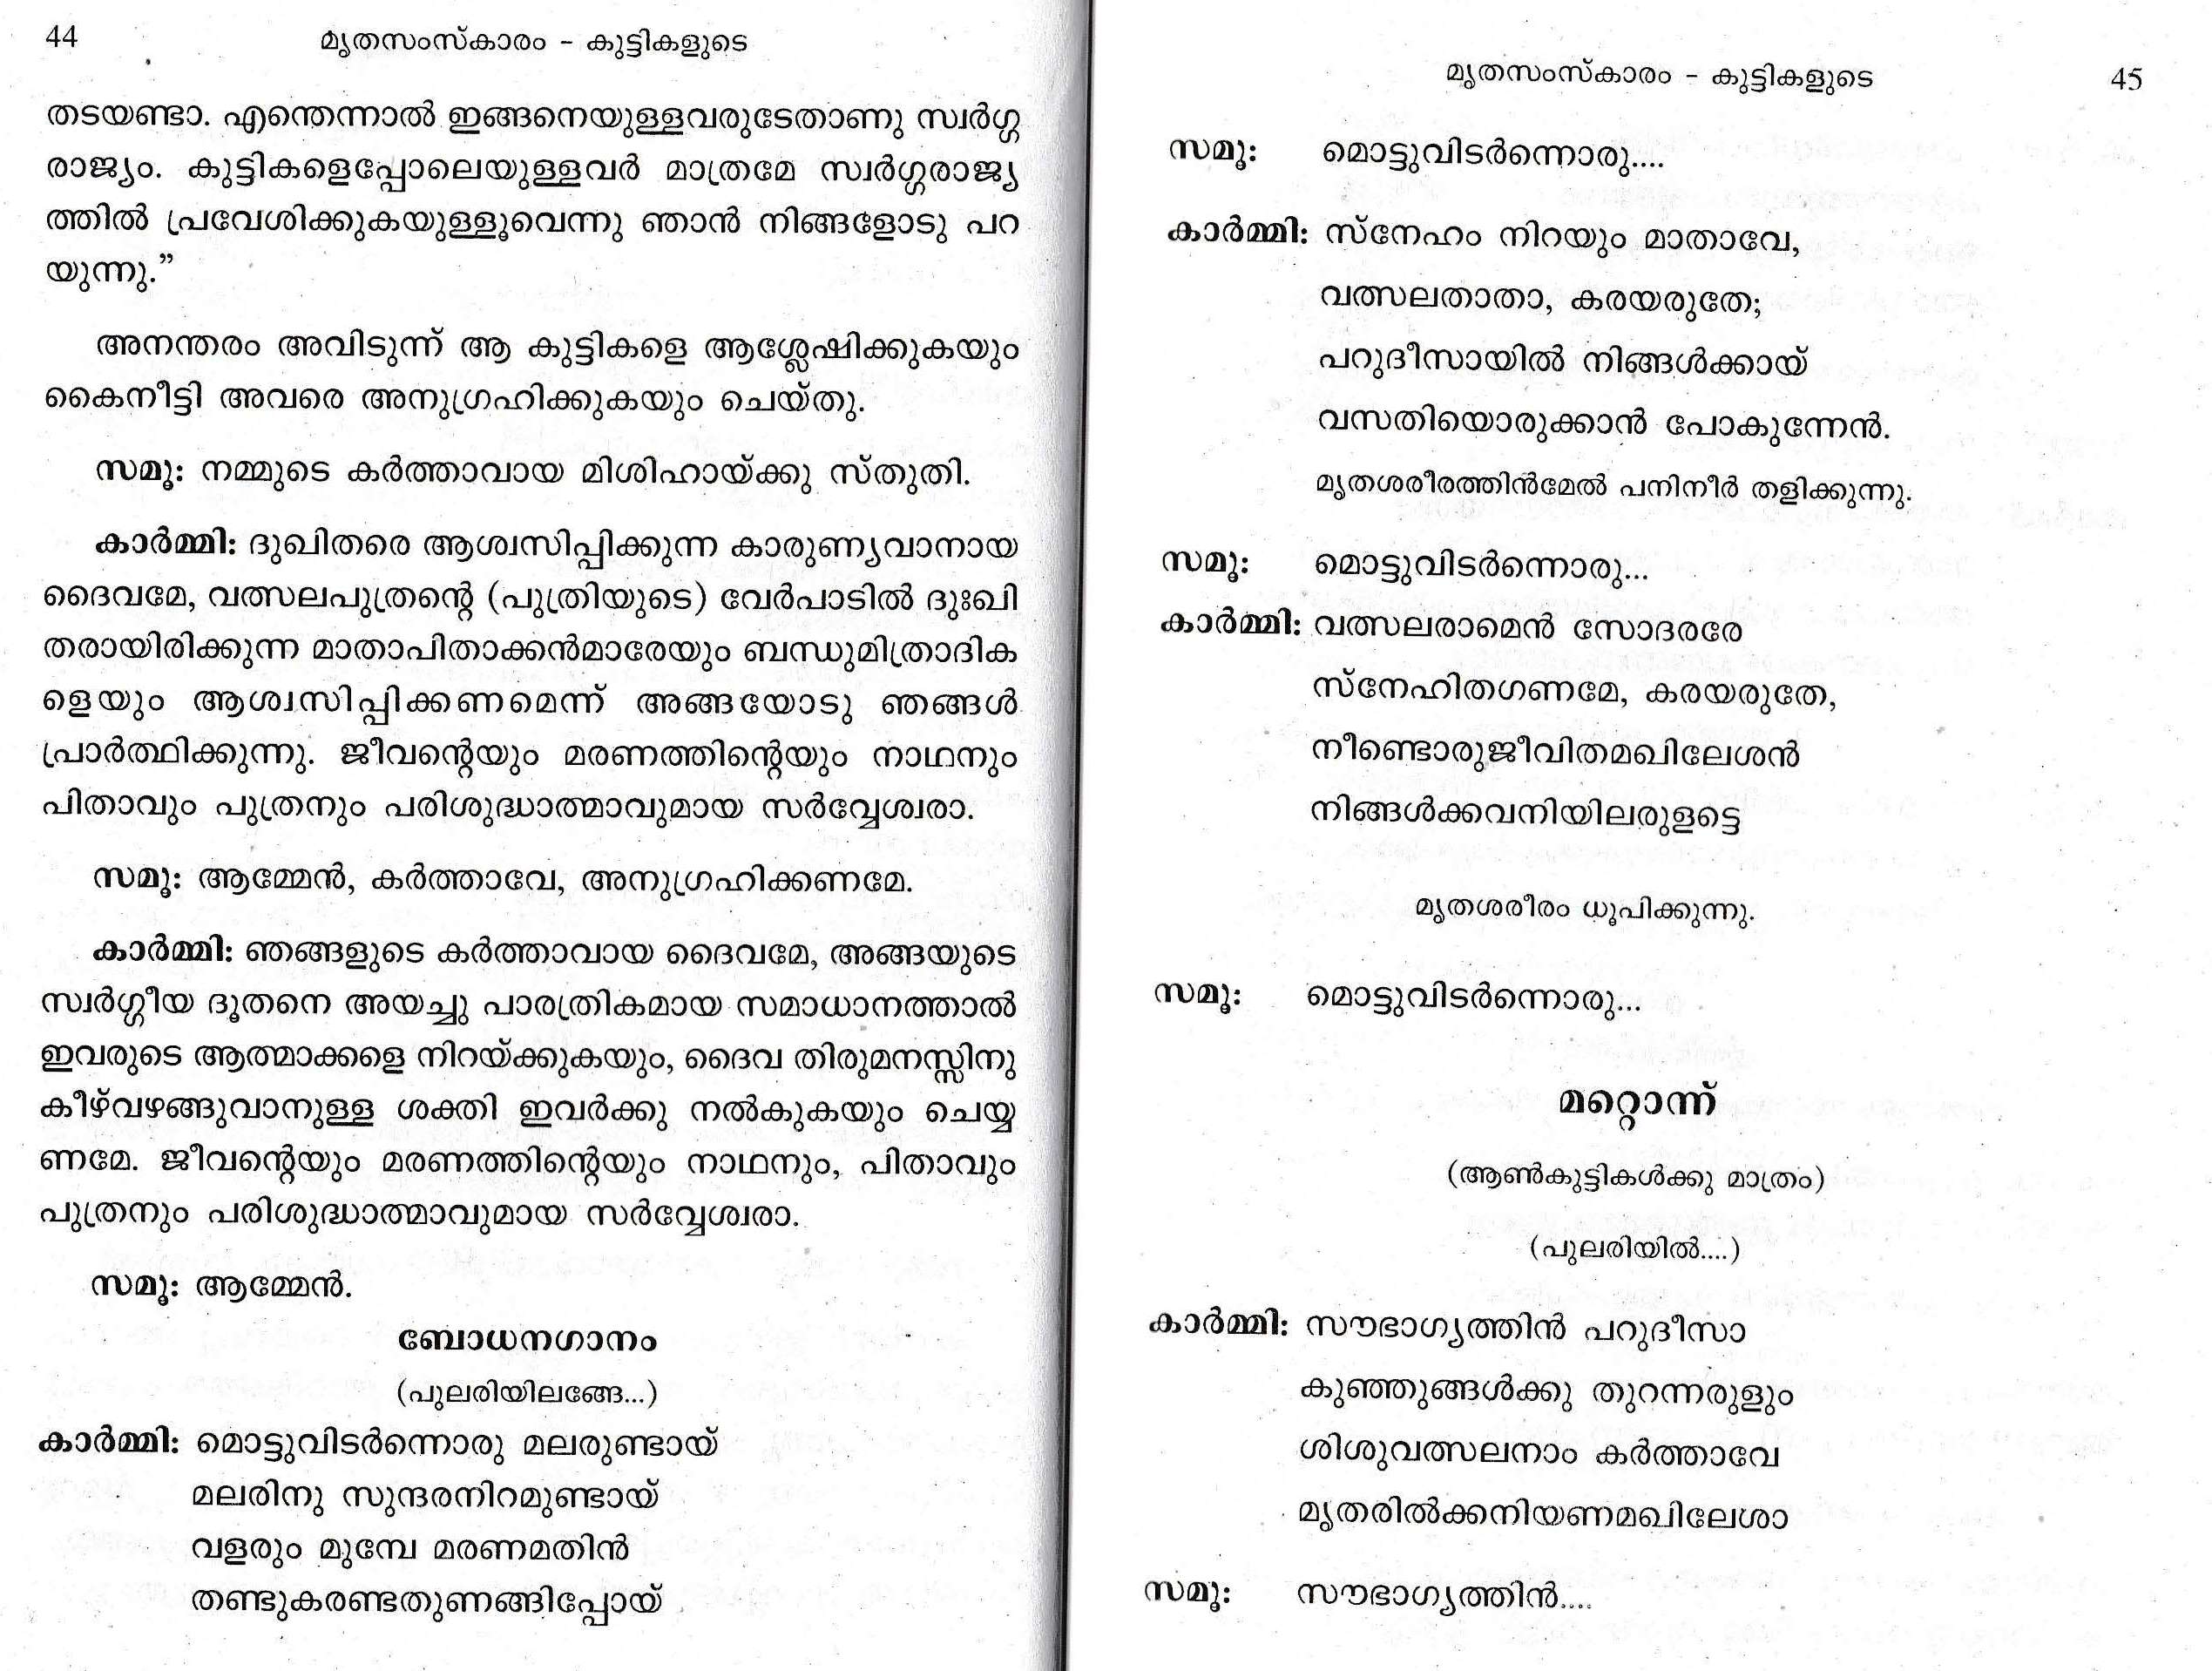 Funeral Service of the Children, SyroMalabar Malayalam_Page_3